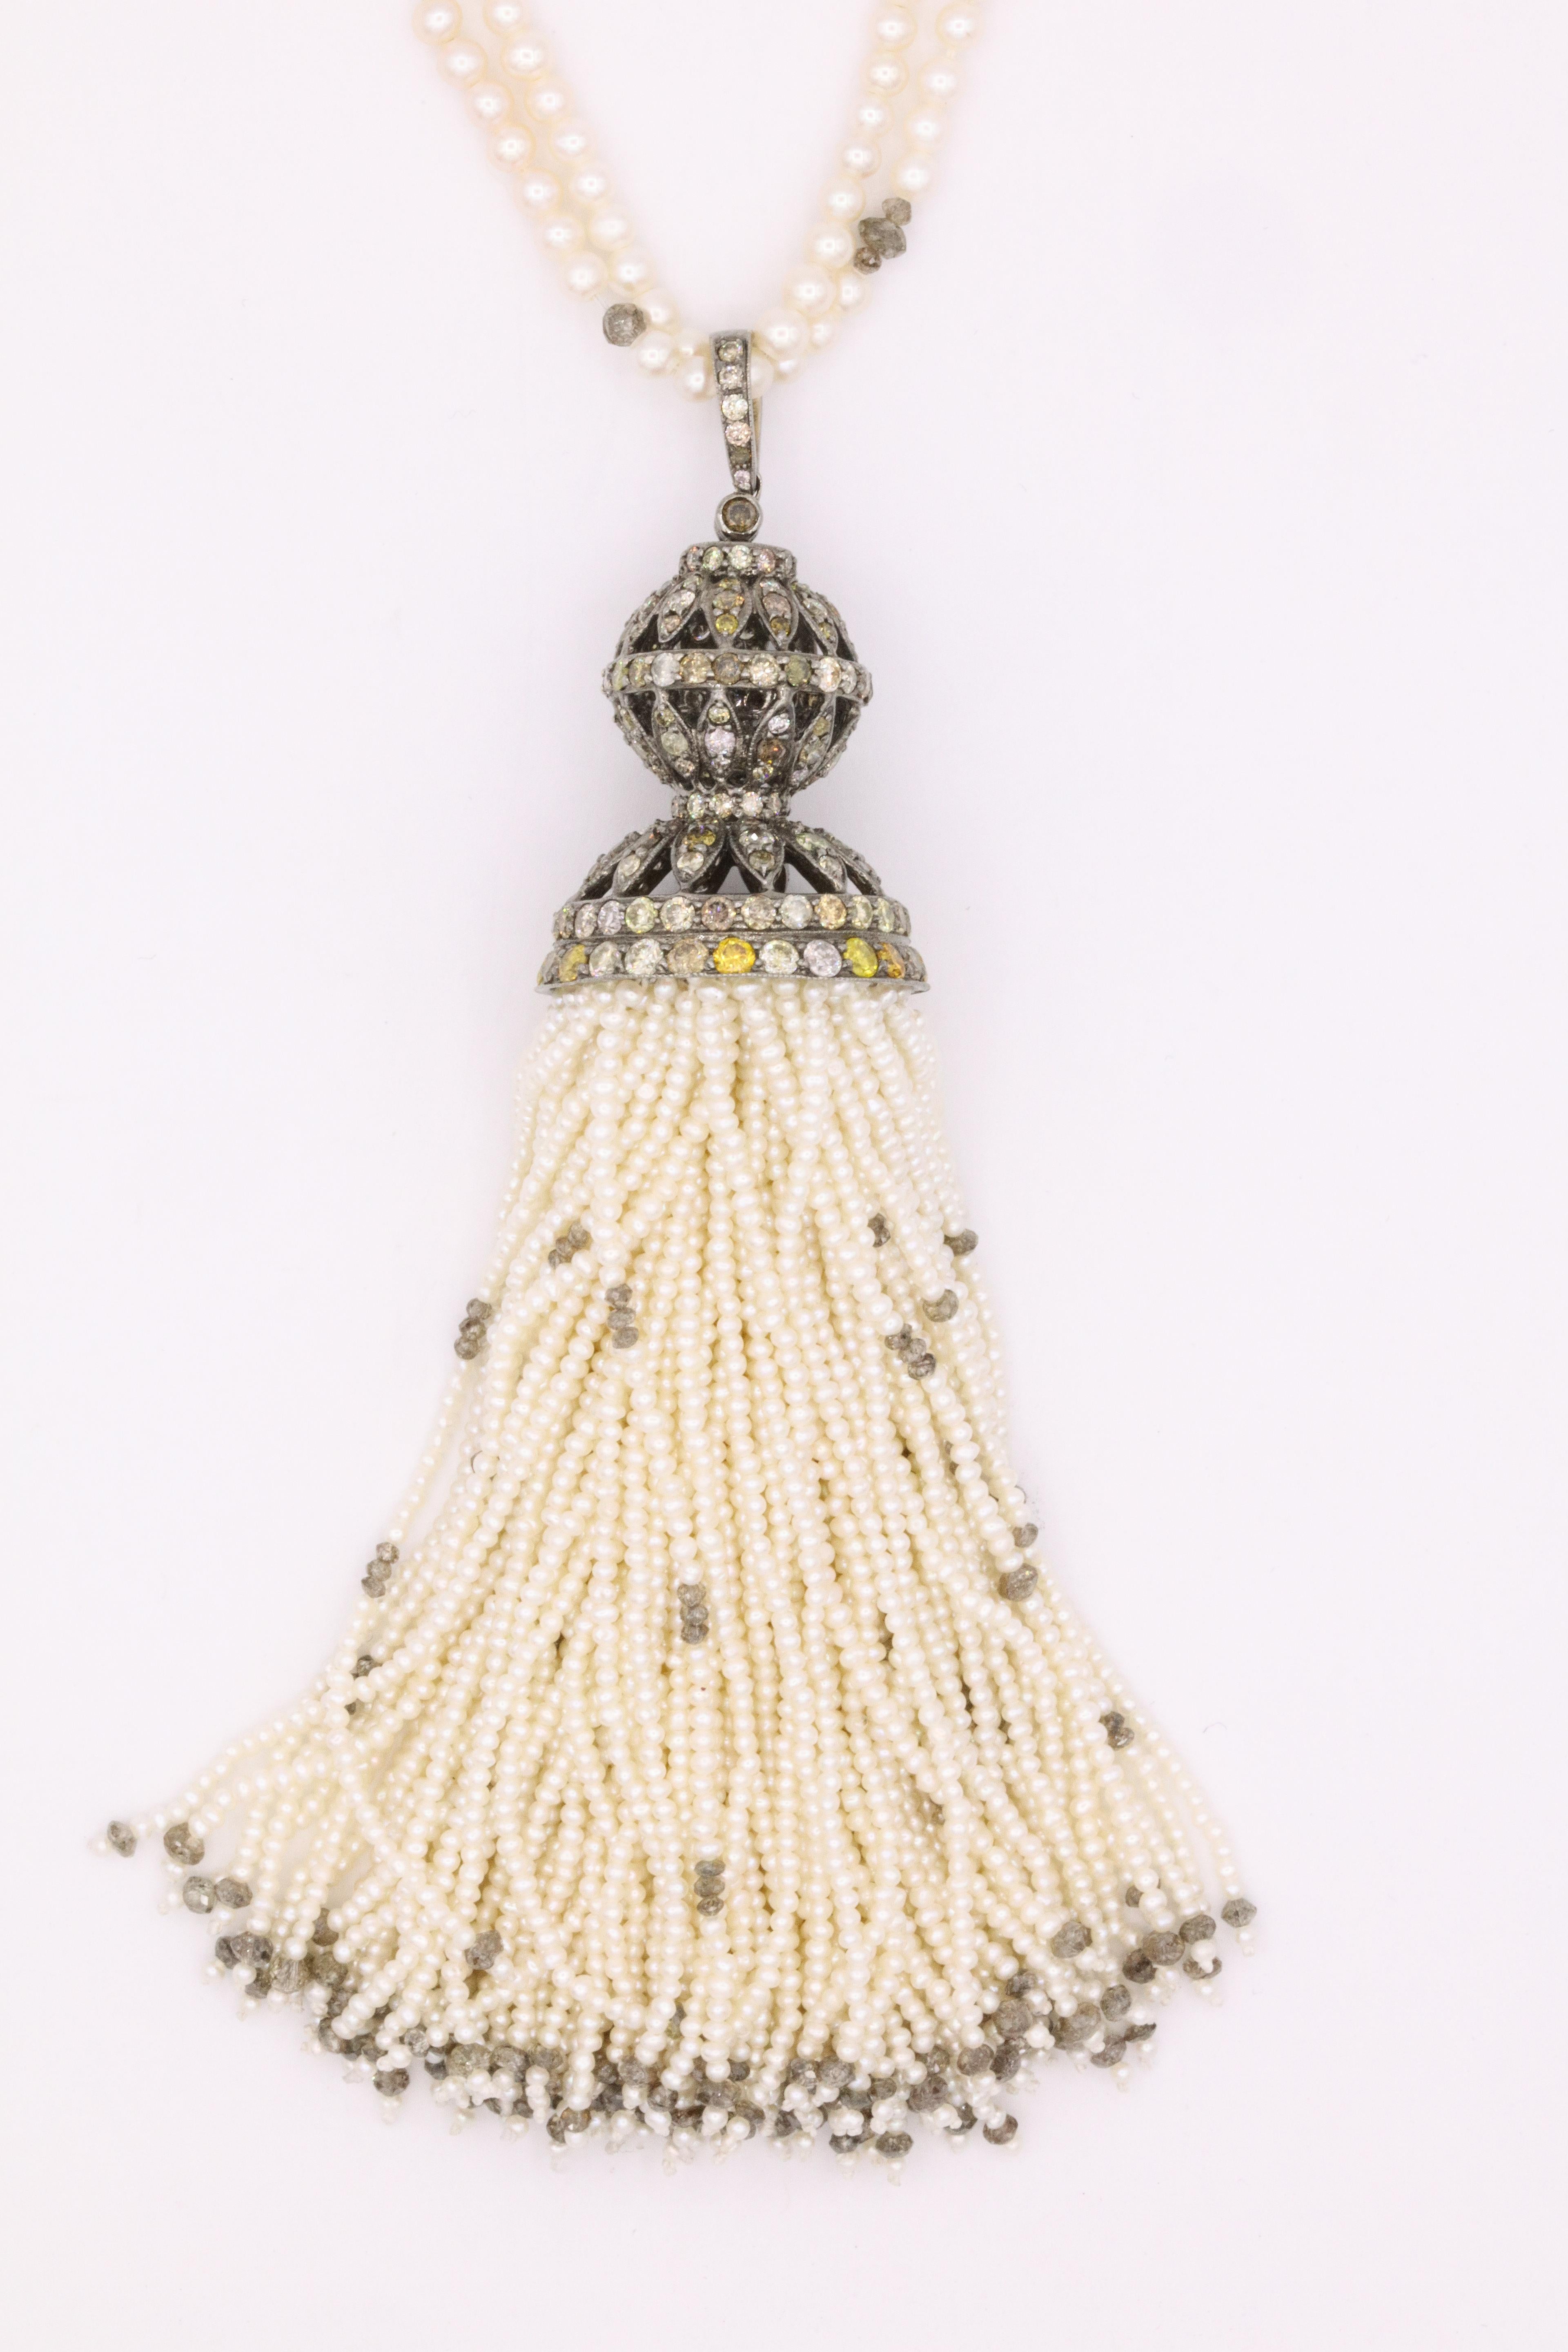 Gorgeous 51 inch tassel necklace featuring 124 tassel strands, measuring 4 1/2 inches, with touches of diamond beads throughout weighing approximately 7 carats and a pave diamond cap of cognac diamonds weighing approximately 5.50 carats. 
Can be